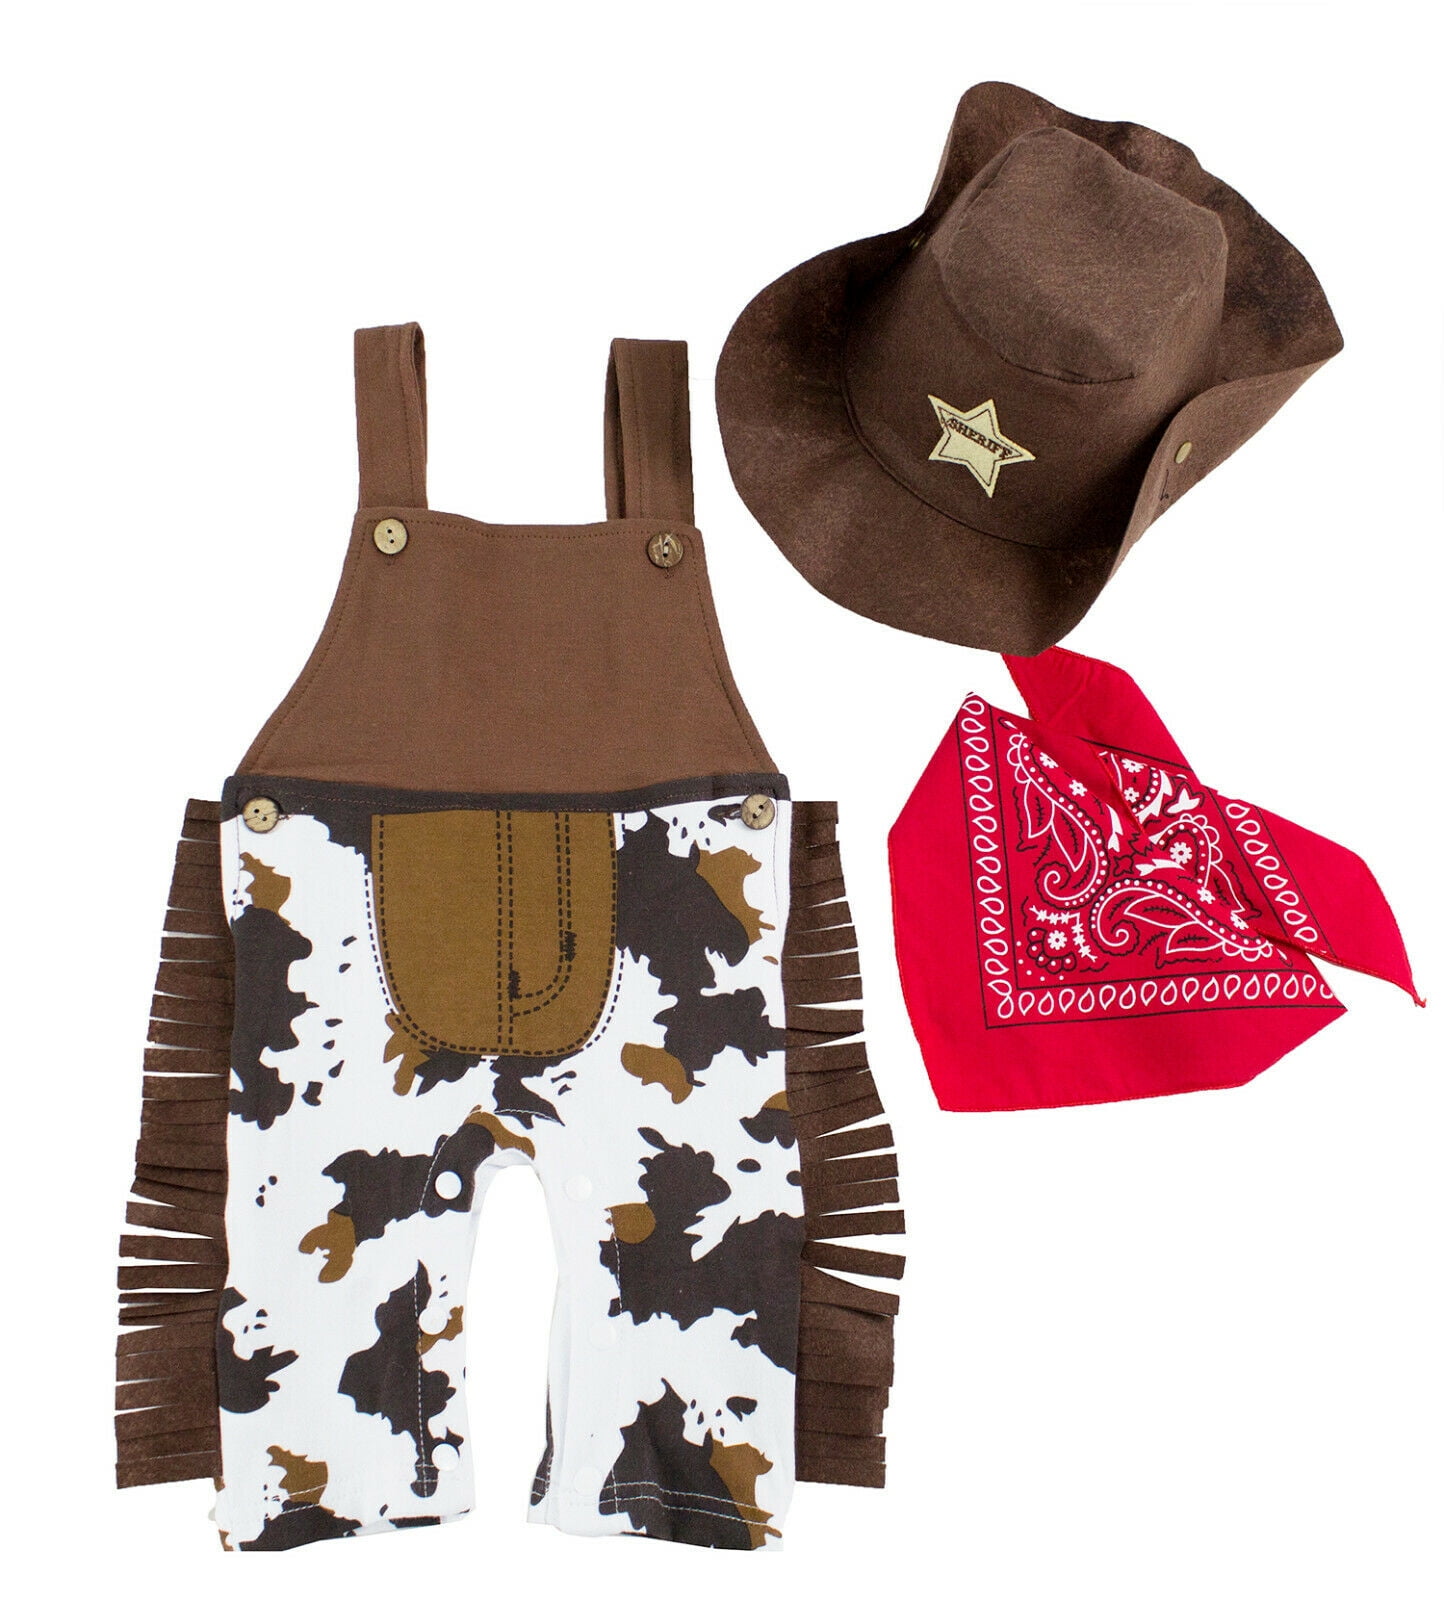 Freebily 3pcs Baby Boys Cowboy Suspenders Overalls with Hat and Handkerchief Outfits Costumes 